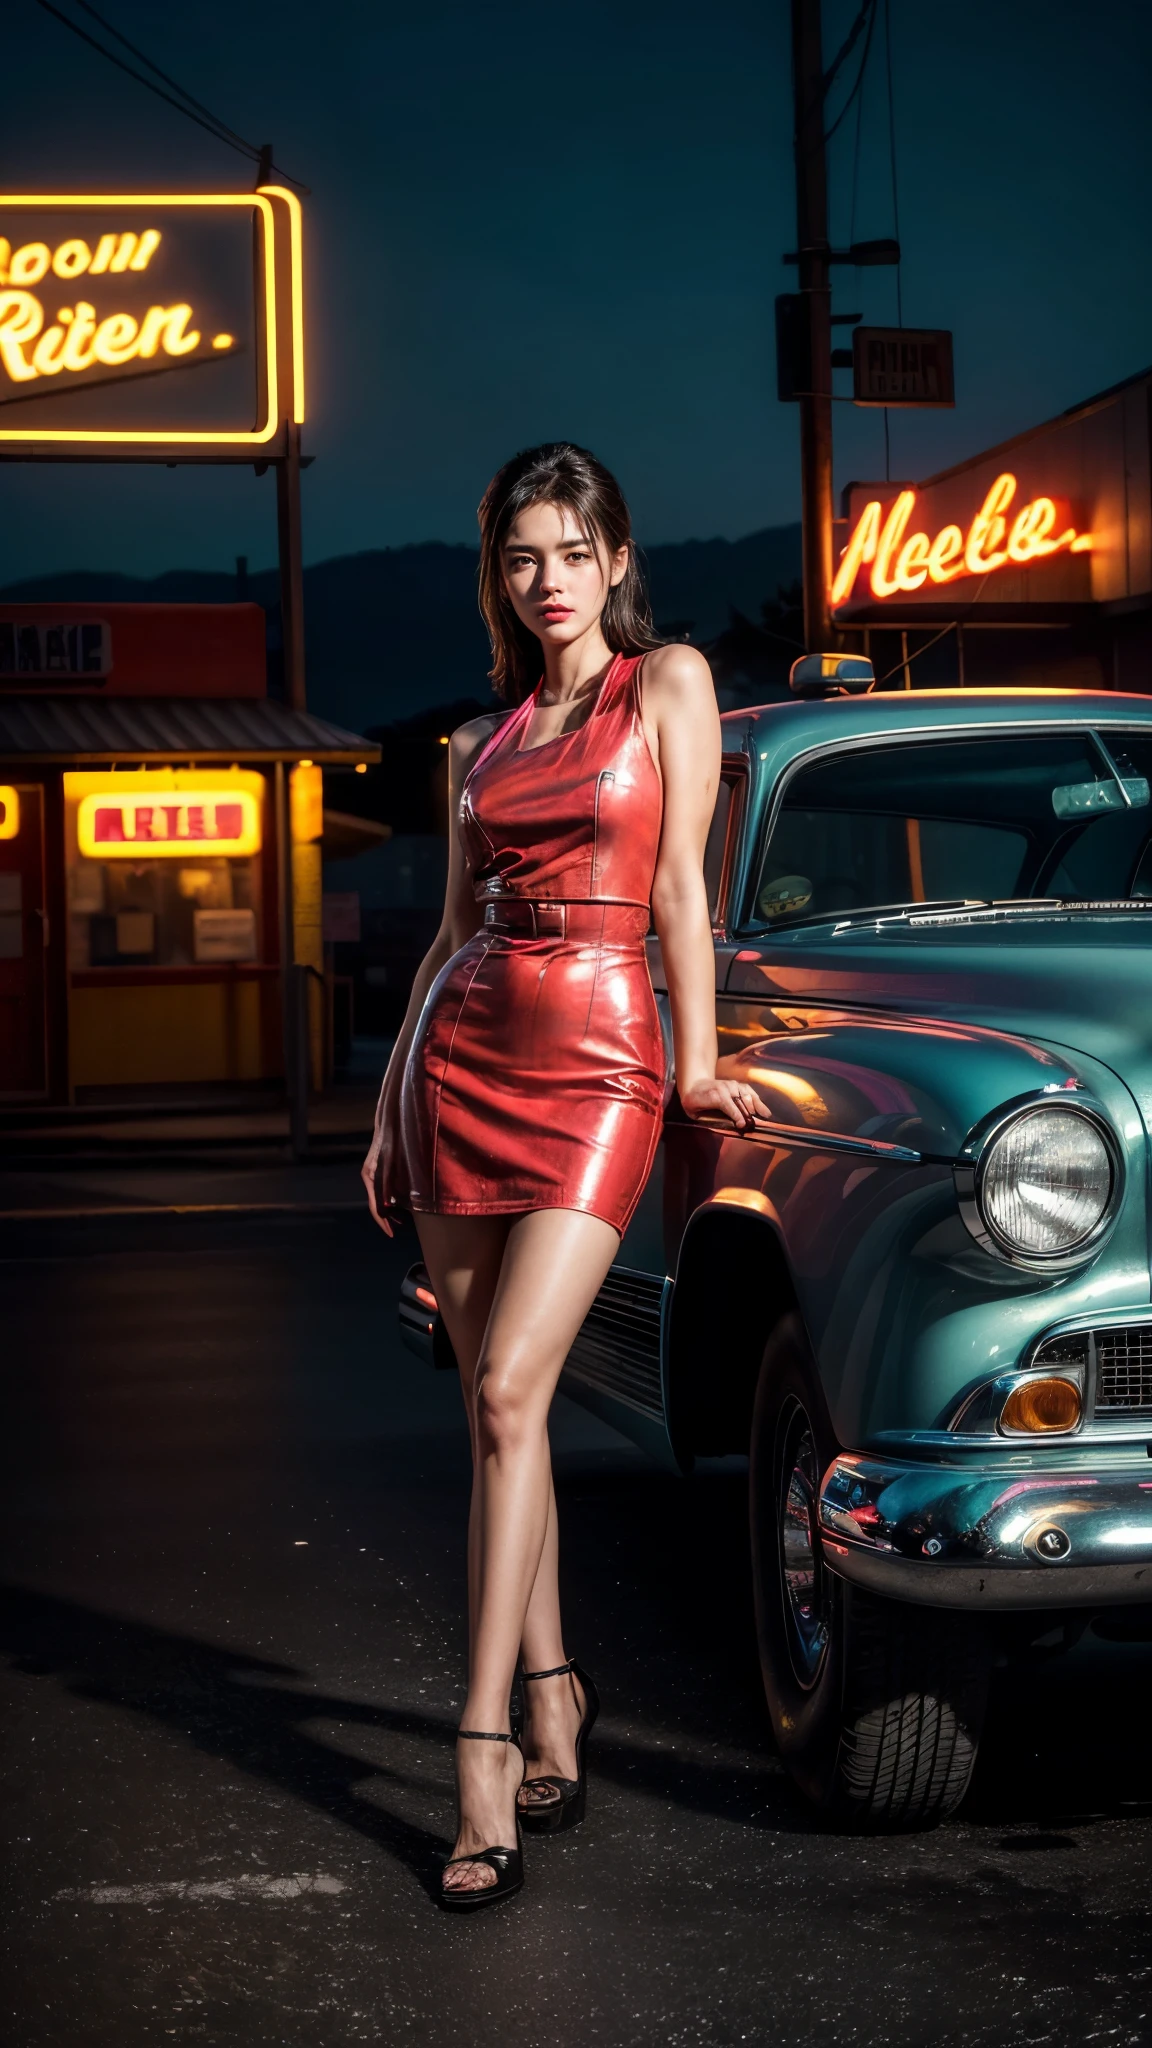 ((masterpiece, highest quality, Highest image quality, High resolution, photorealistic, Raw photo, 8K)), arafed view of a motel with a car parked in front of it, with neon signs, A woman waiting for a guest in front of a motel, seduction, short dress and high heels, route 6 6, neon signs, 1 9 5 0 s americana tourism, some have neon signs, neon lights outside, neon advertisements, gigantic neon signs, neon shops, by Arnie Swekel, few neon signs, neon signs in background, (Just 1 meter away from Picture Taken), k, (full body with close up shot), Ray Tracing CG Unity 8k walpaper, 